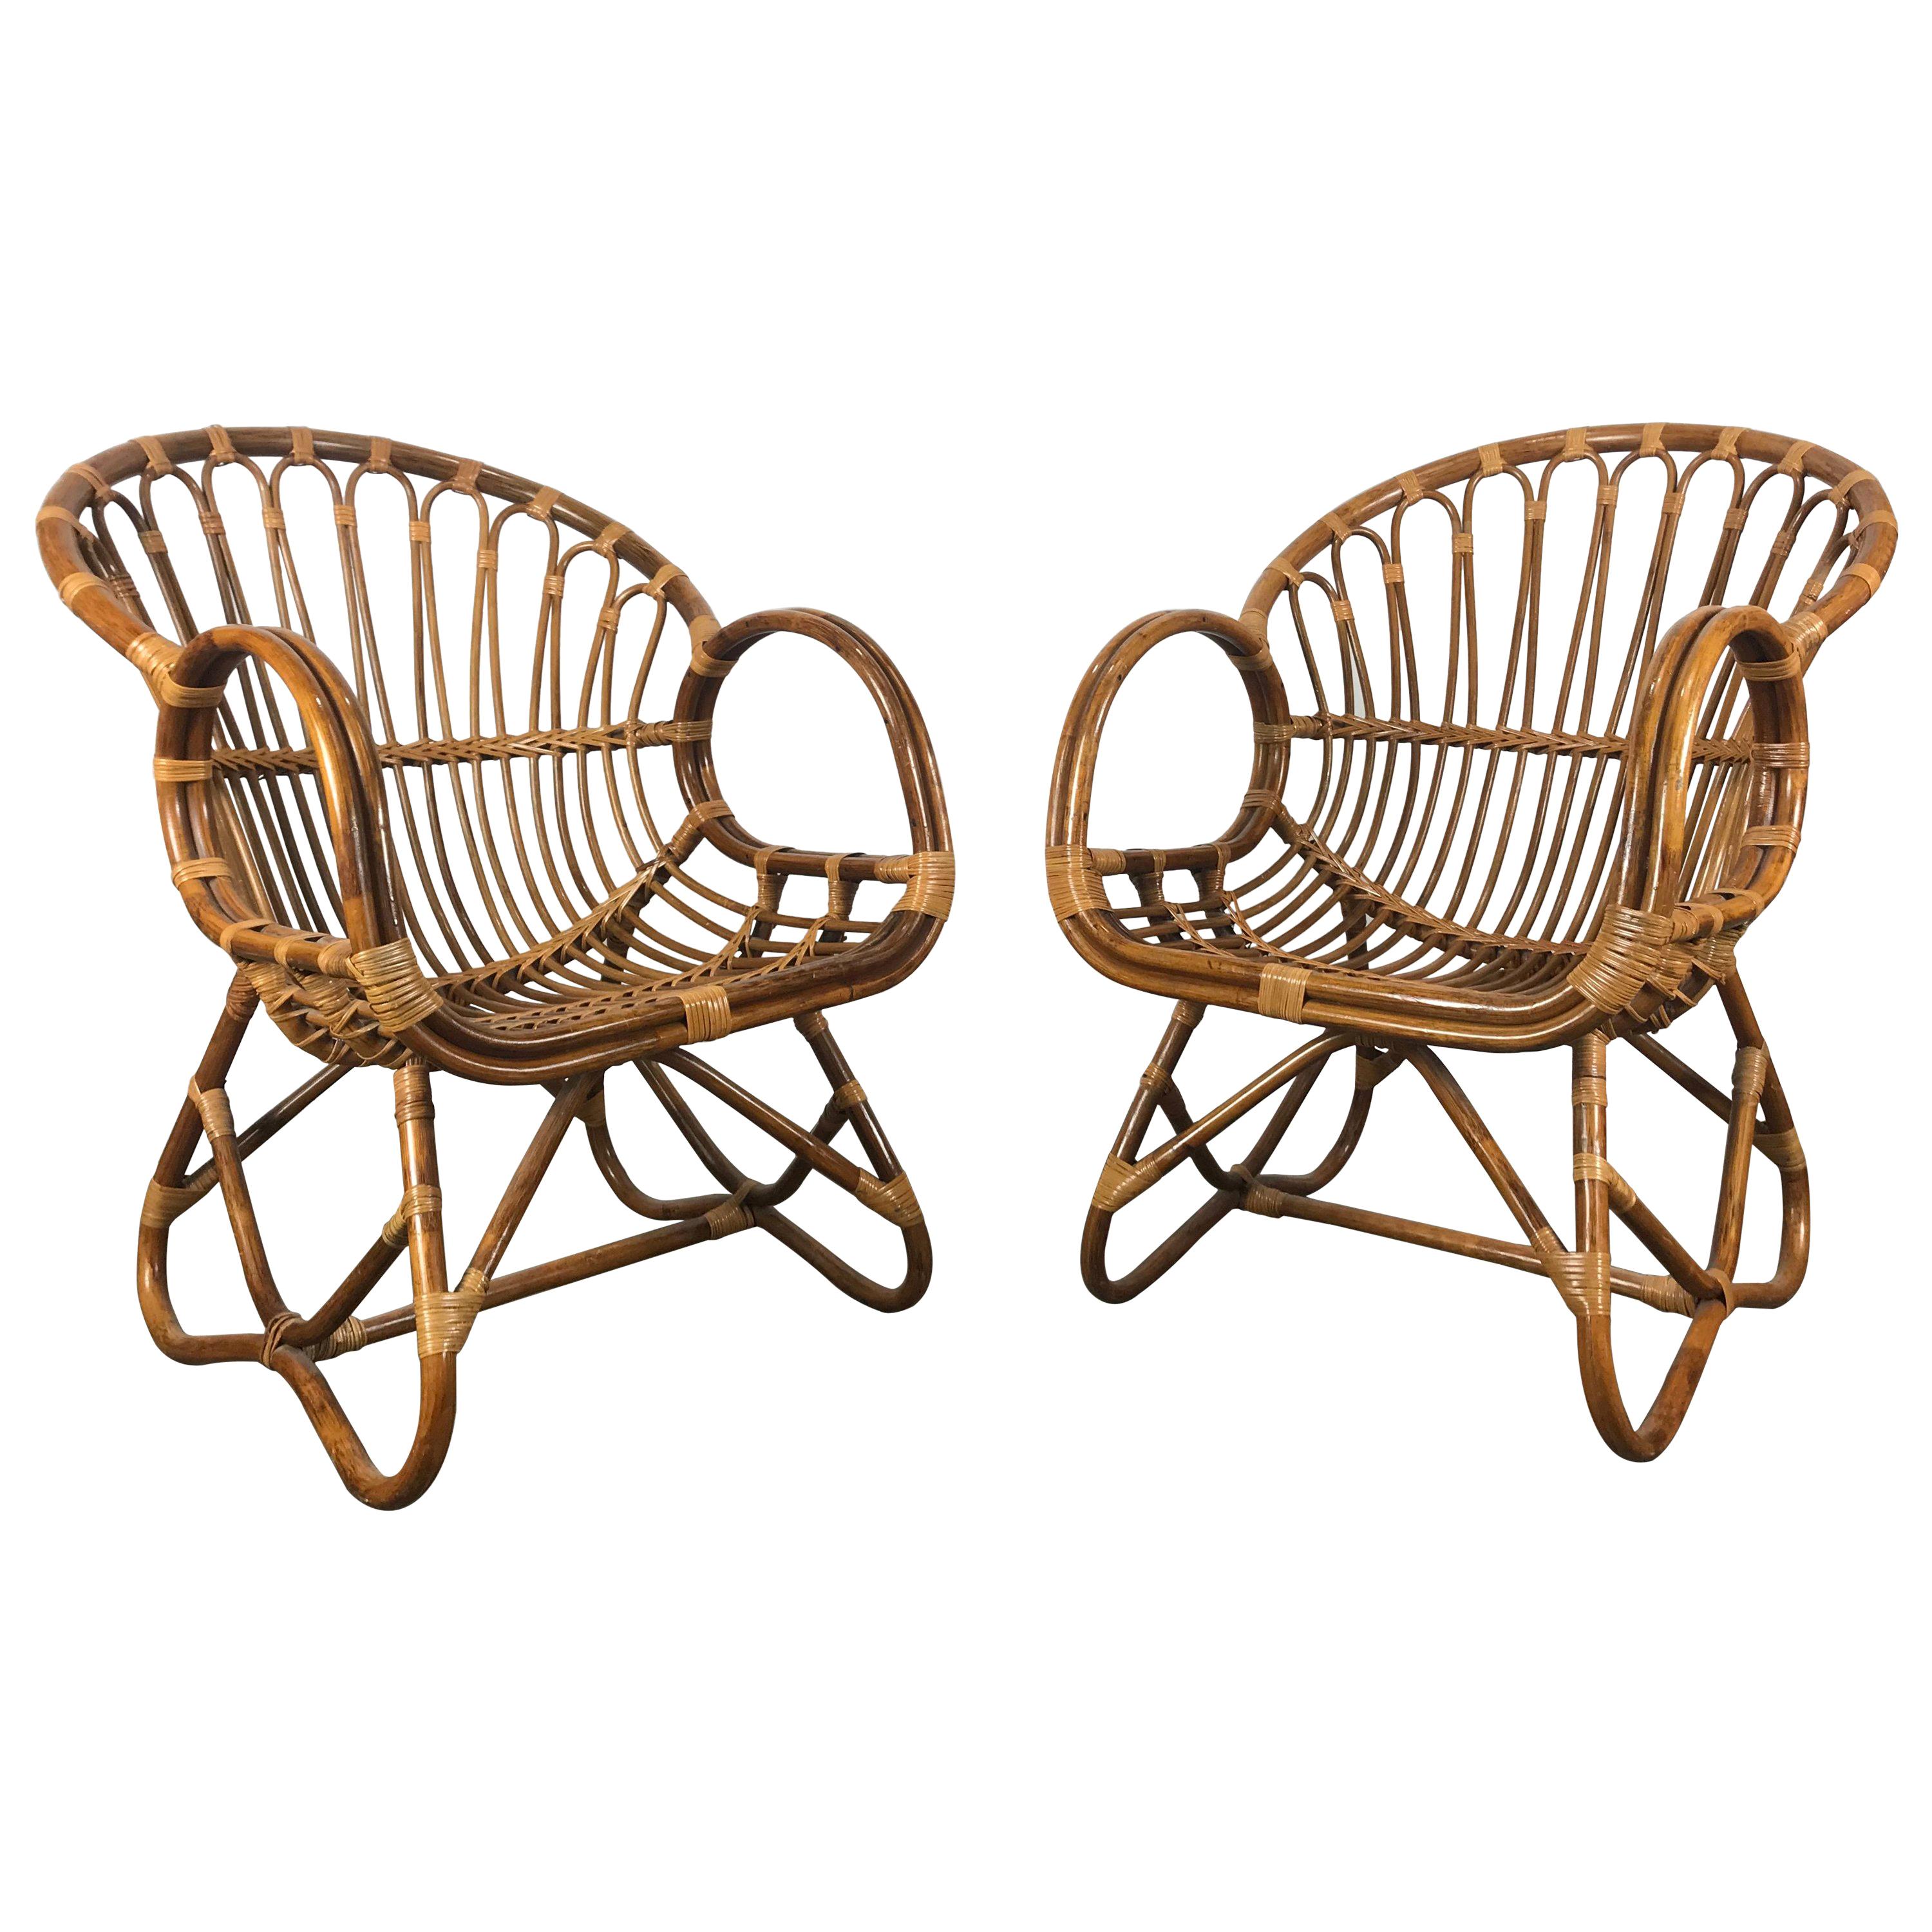 Pair of Mid-Century Modern after Franco Albini Bamboo or Rattan Lounge Chairs